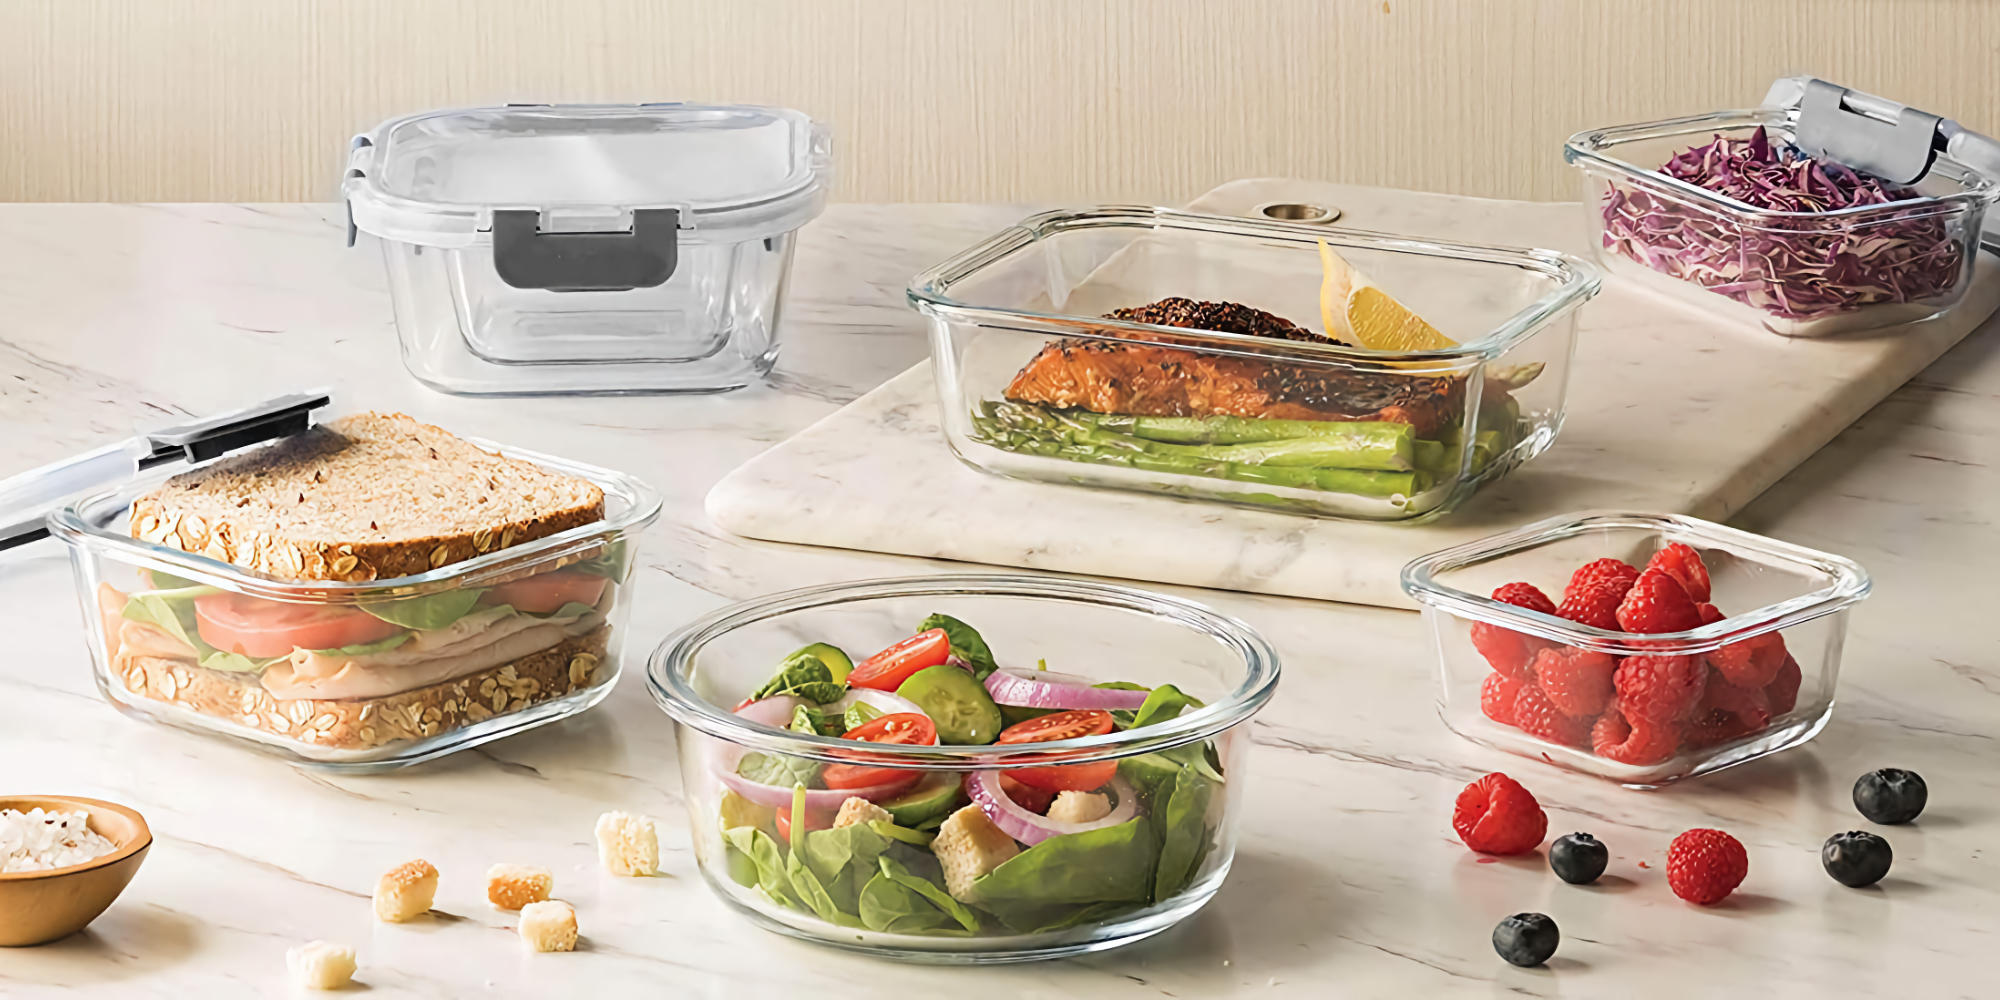 This highly-rated 24-piece glass food storage container set just fell under  $34 (Reg. $40+)